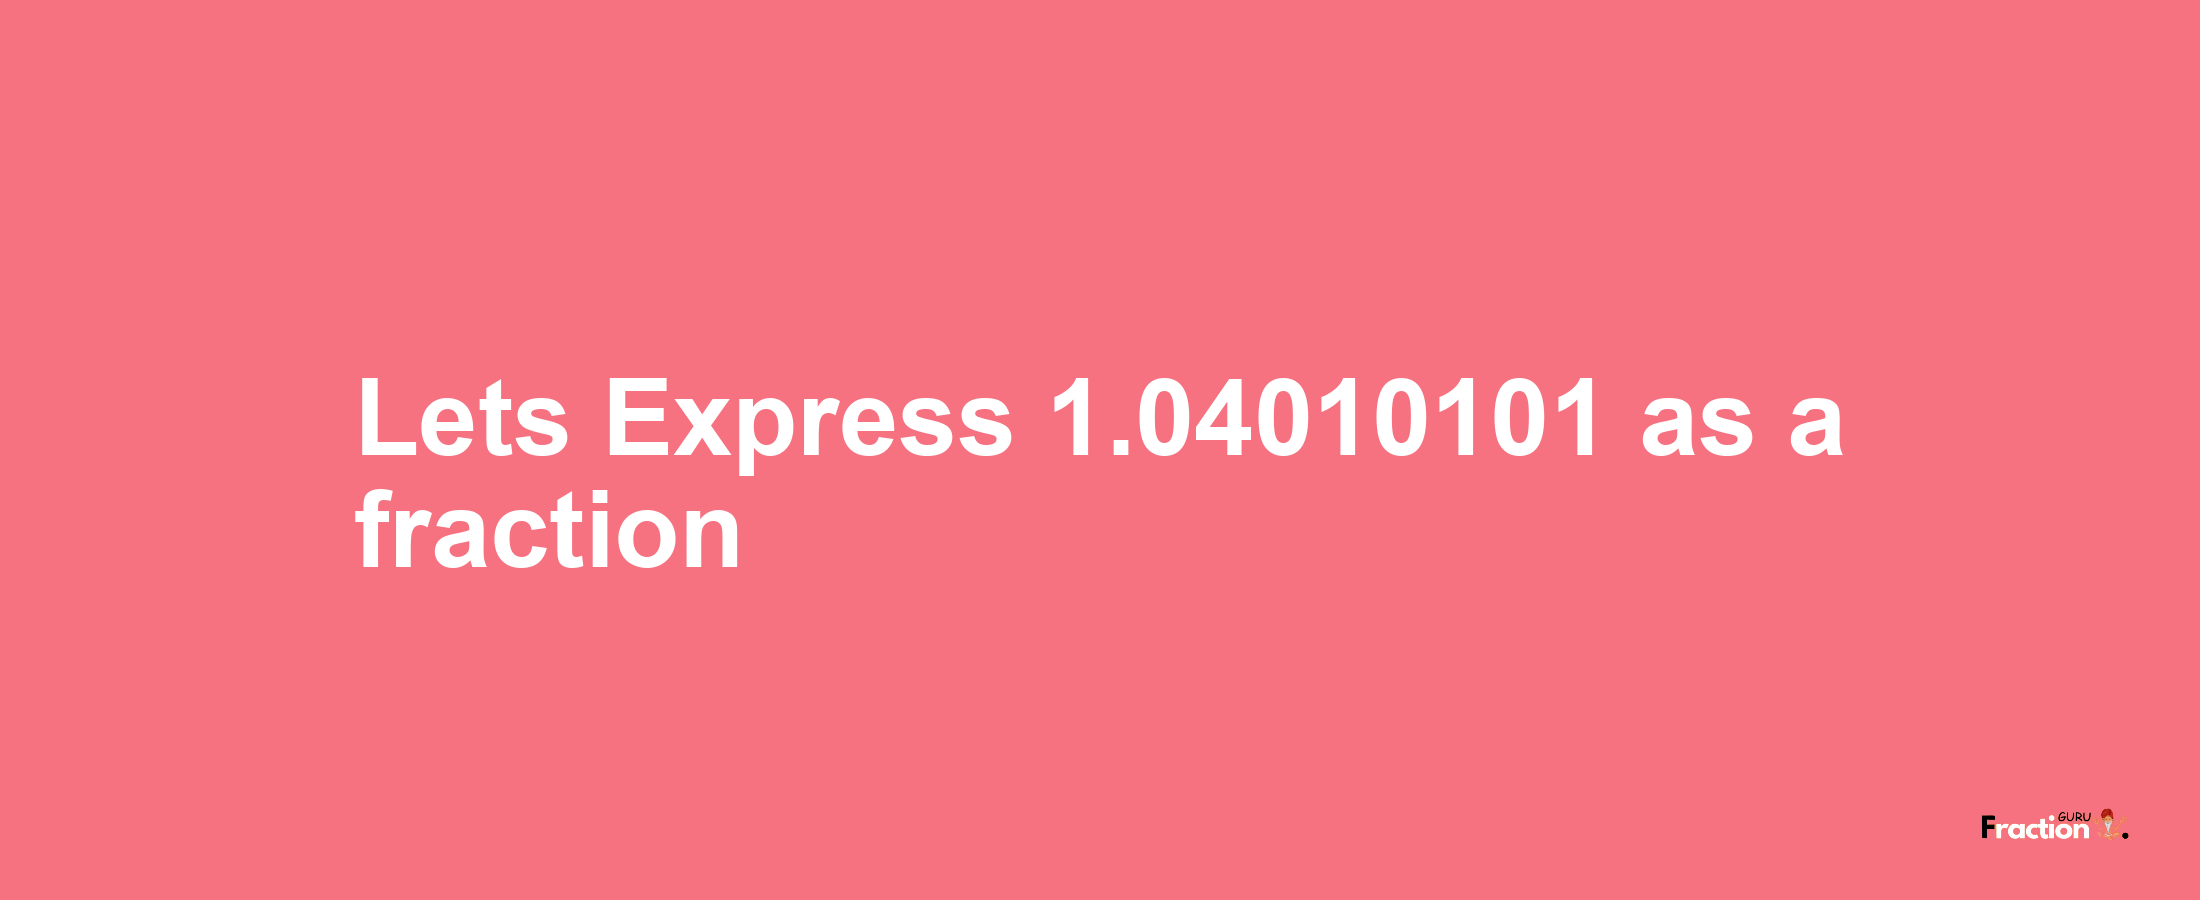 Lets Express 1.04010101 as afraction